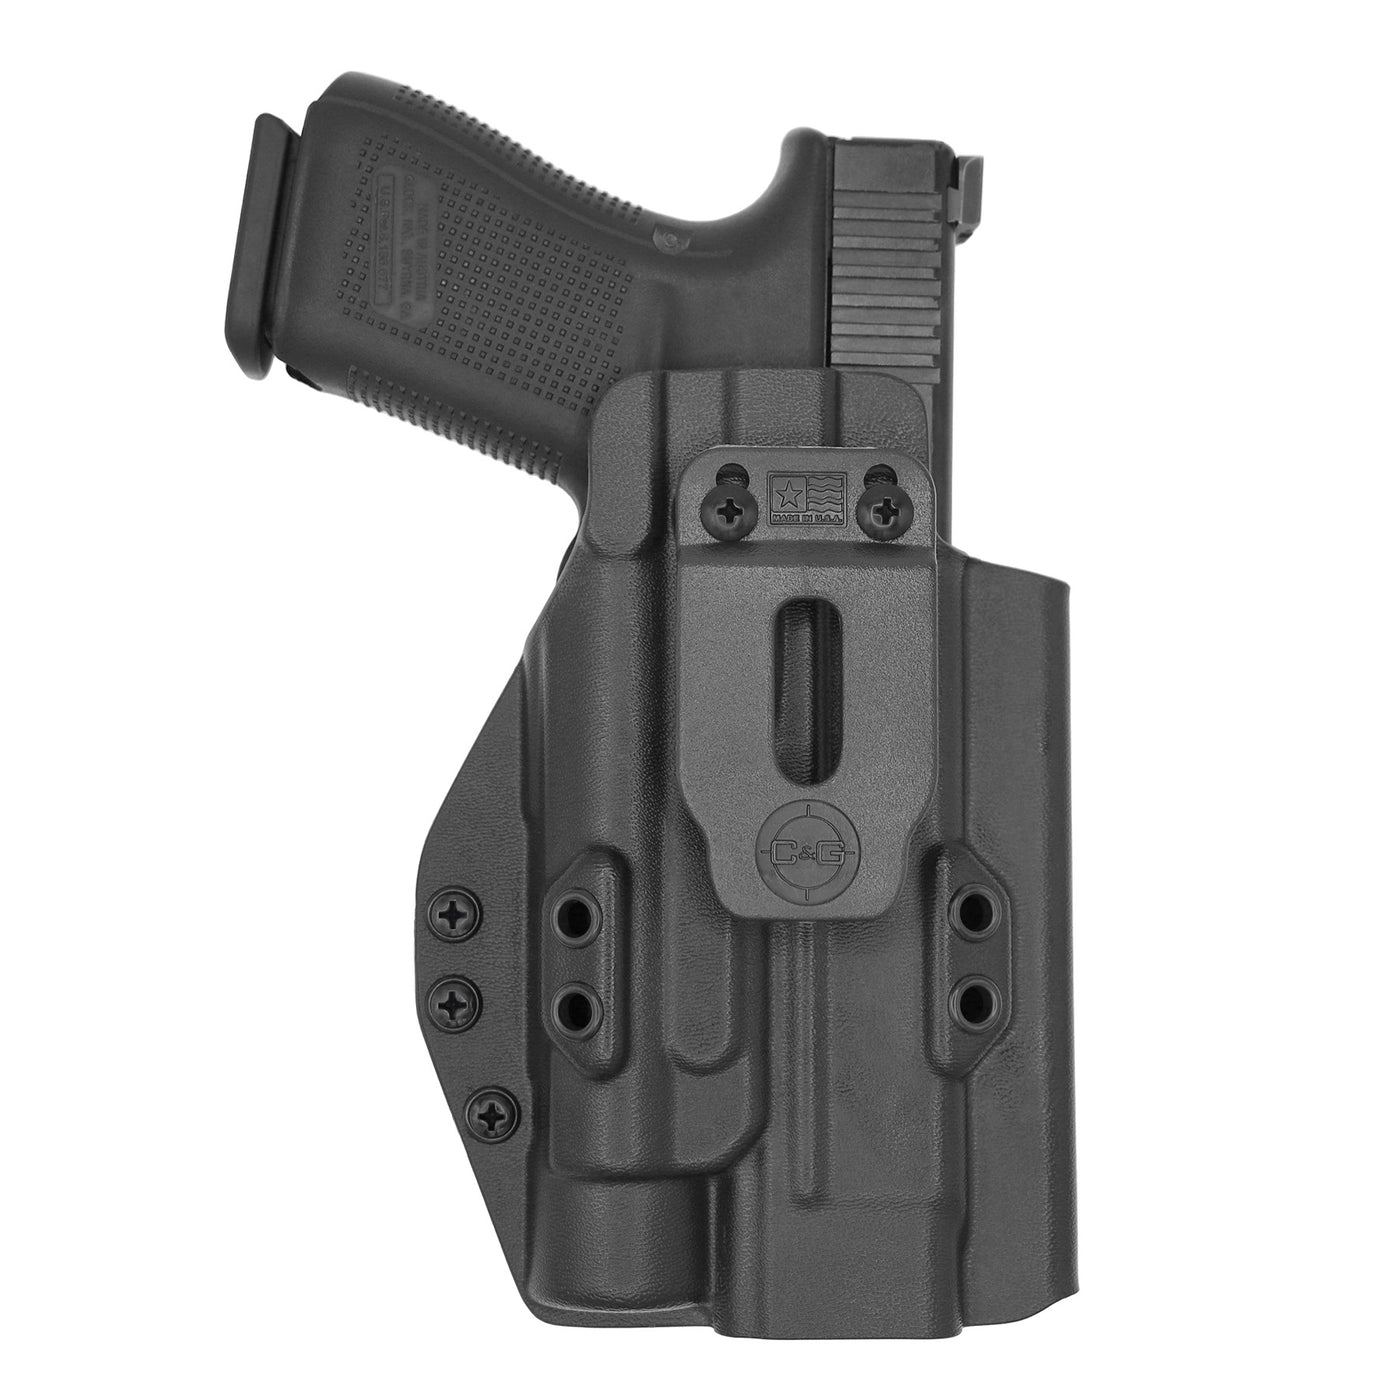 C&G Holsters Quickship IWB Tactical Poly80 Streamlight TLR1 in holstered position